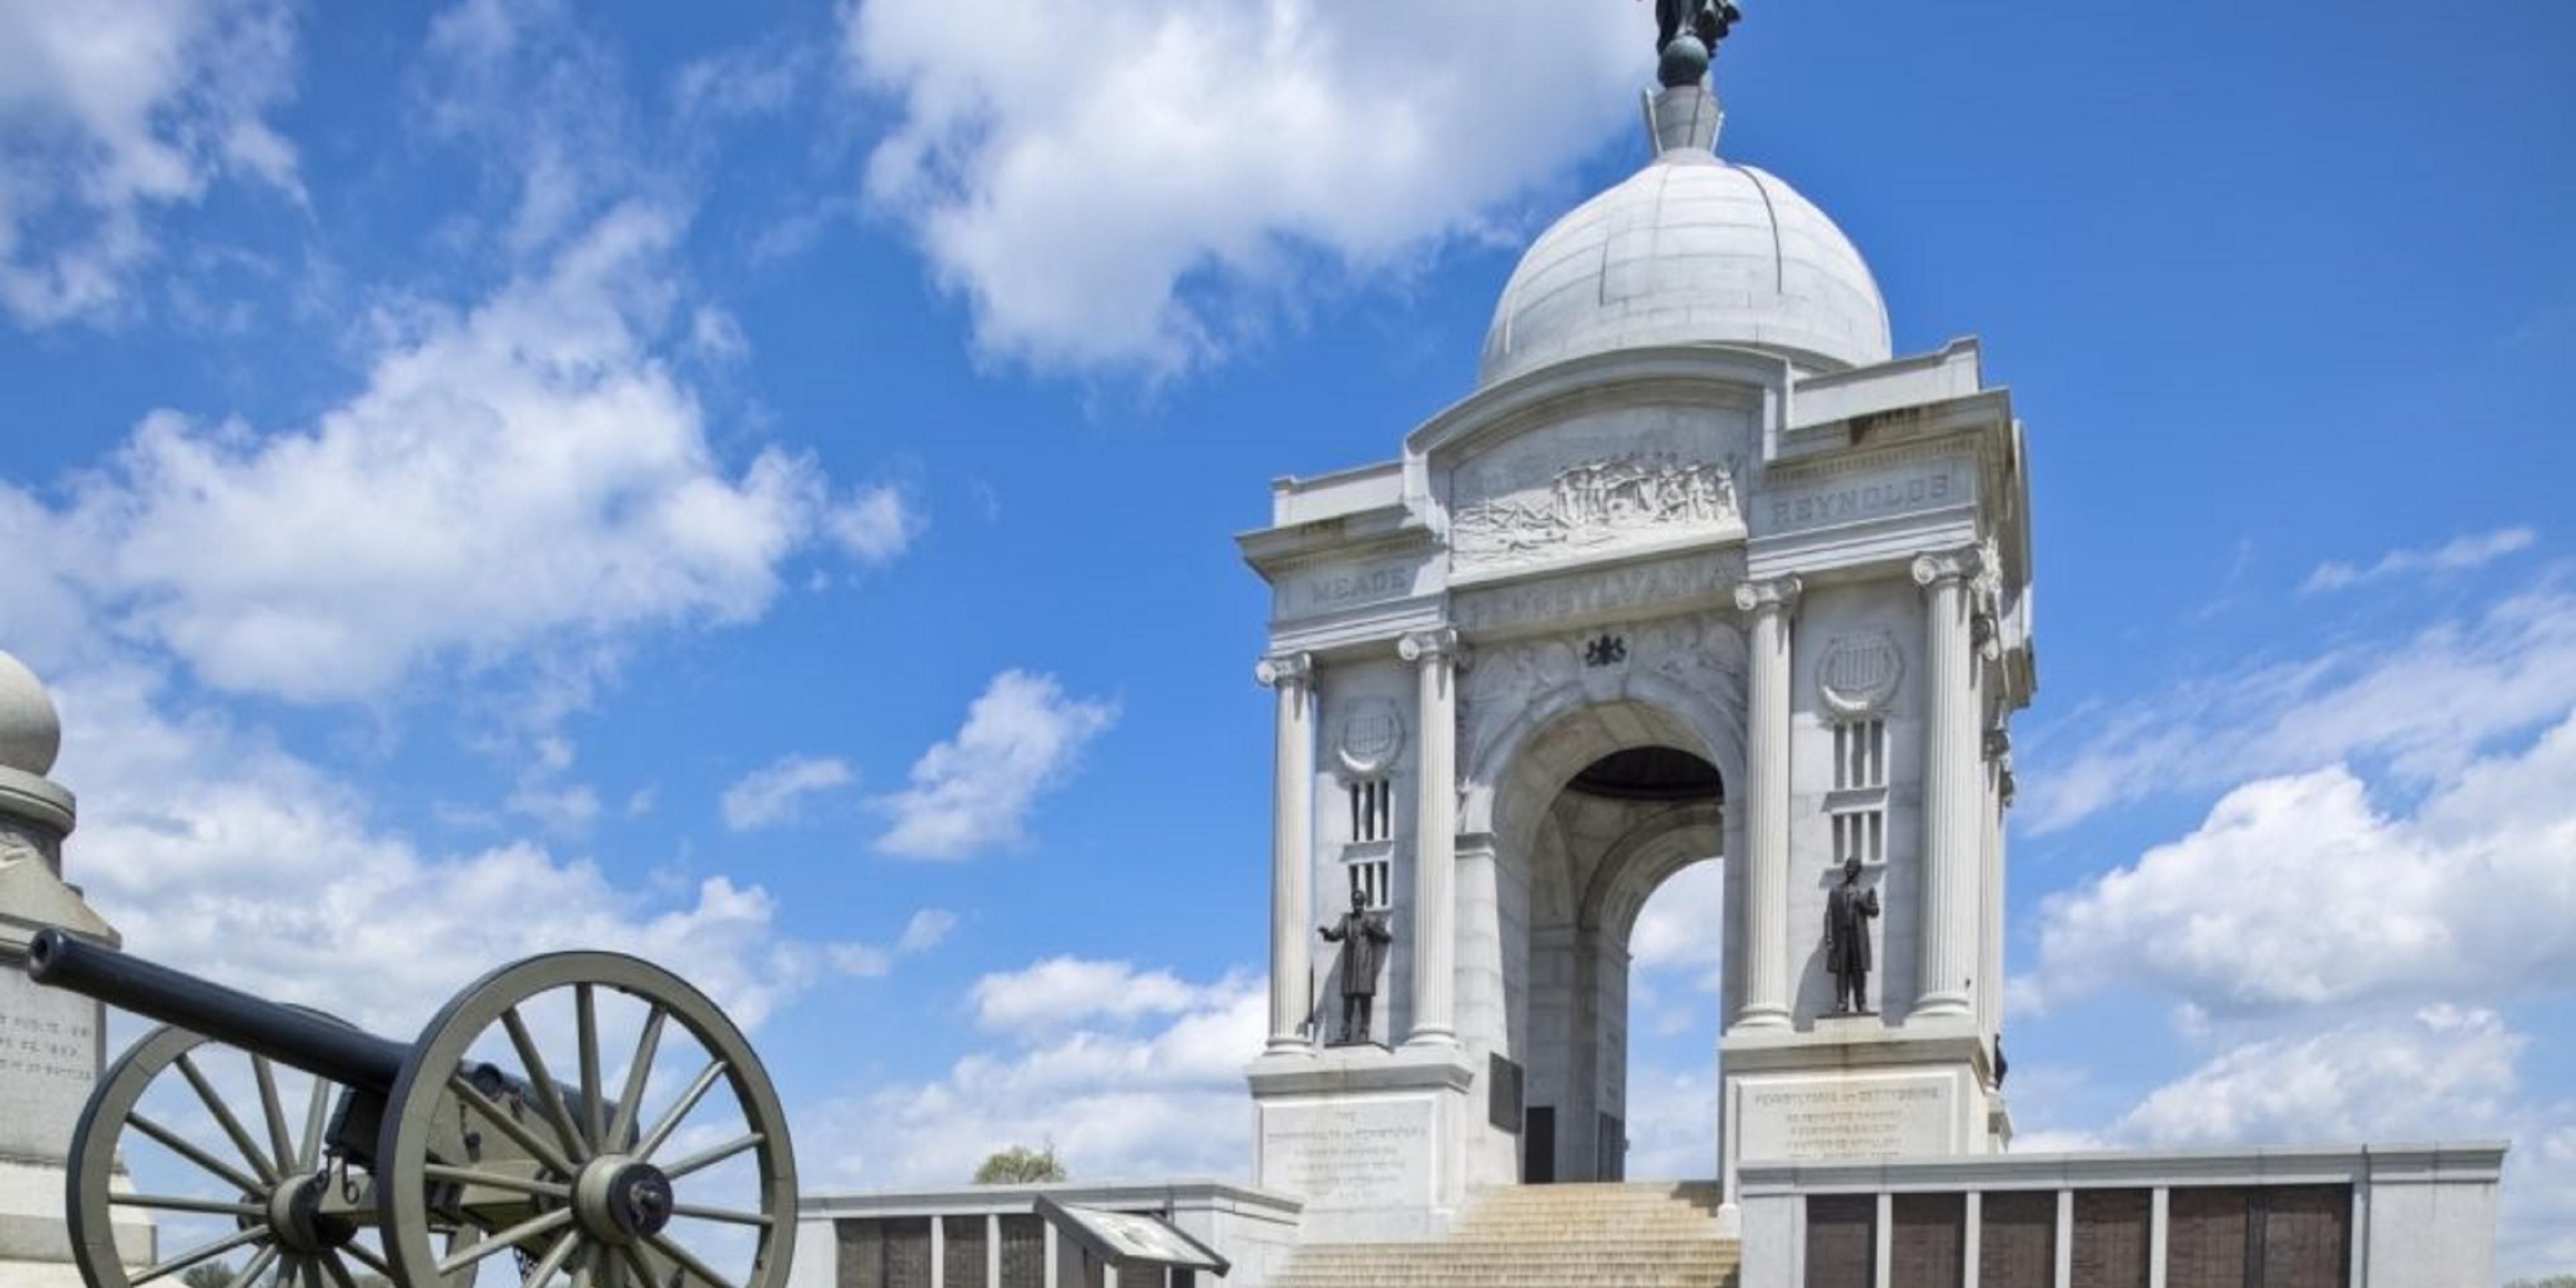 Located right next to the beautiful Gettysburg Historic Battlefield. Enjoy the scenic views, remarkable monuments, and walk in the steps of famous generals. Take in a living history interactive tour and then relax in our modern cozy rooms to unwind after your memorable day.